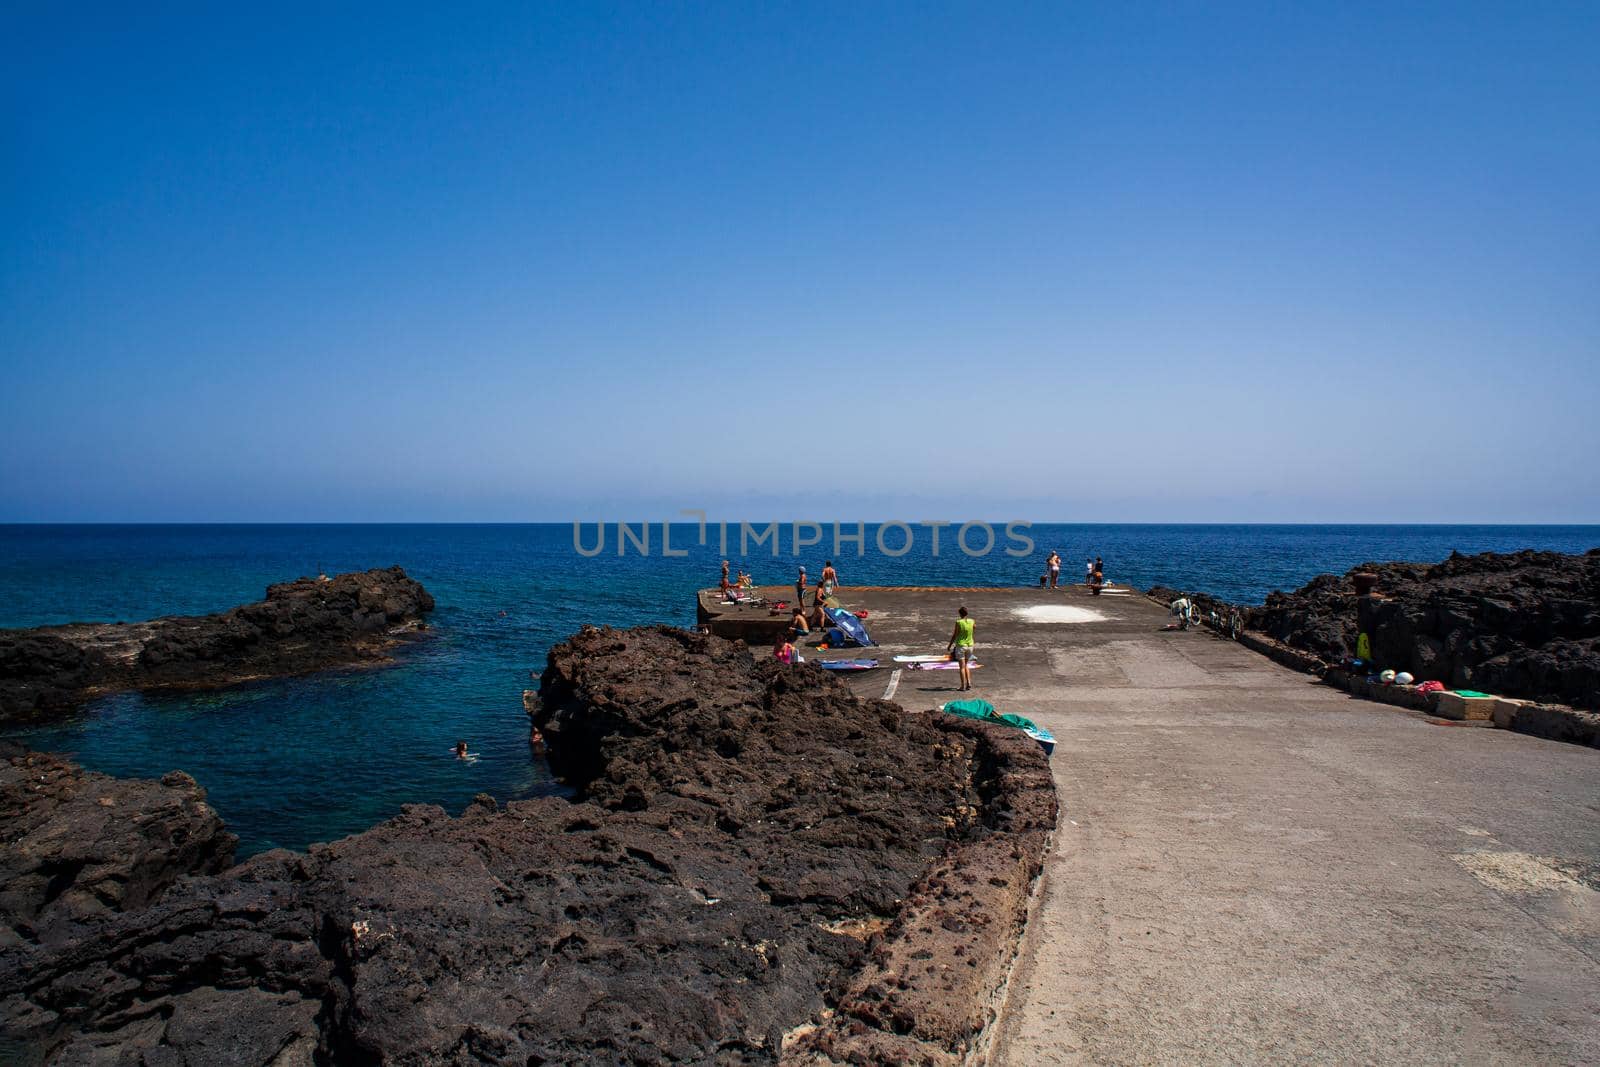 View of the lava beach of Linosa Called Mannarazza by bepsimage